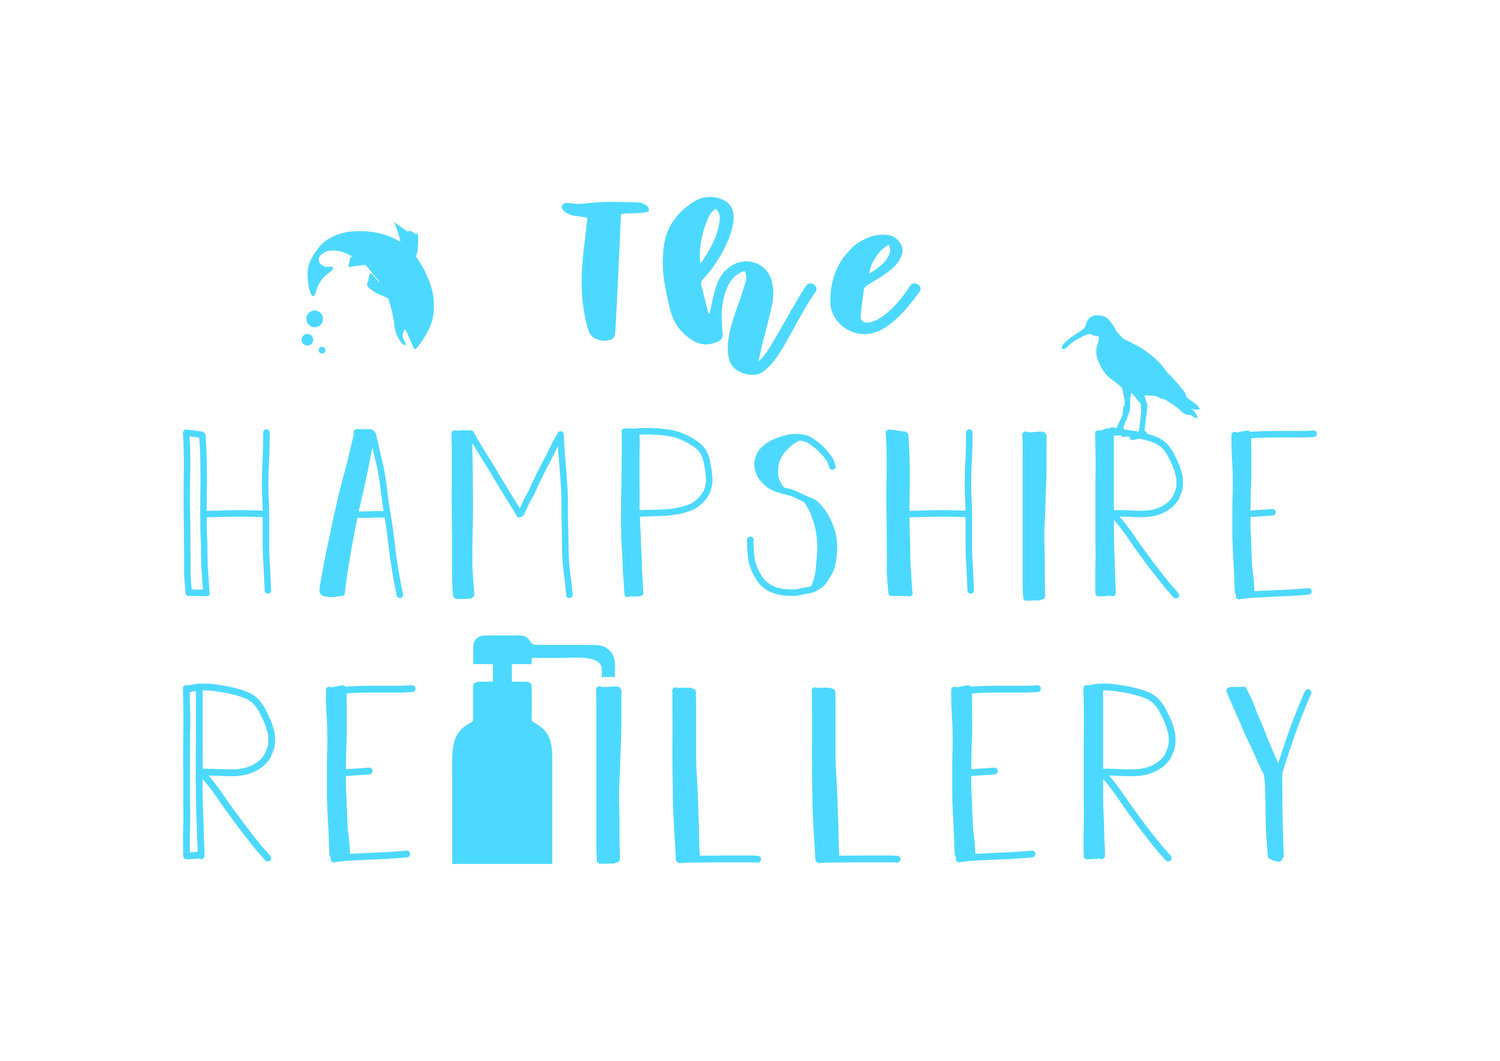 The Hampshire Refillery 